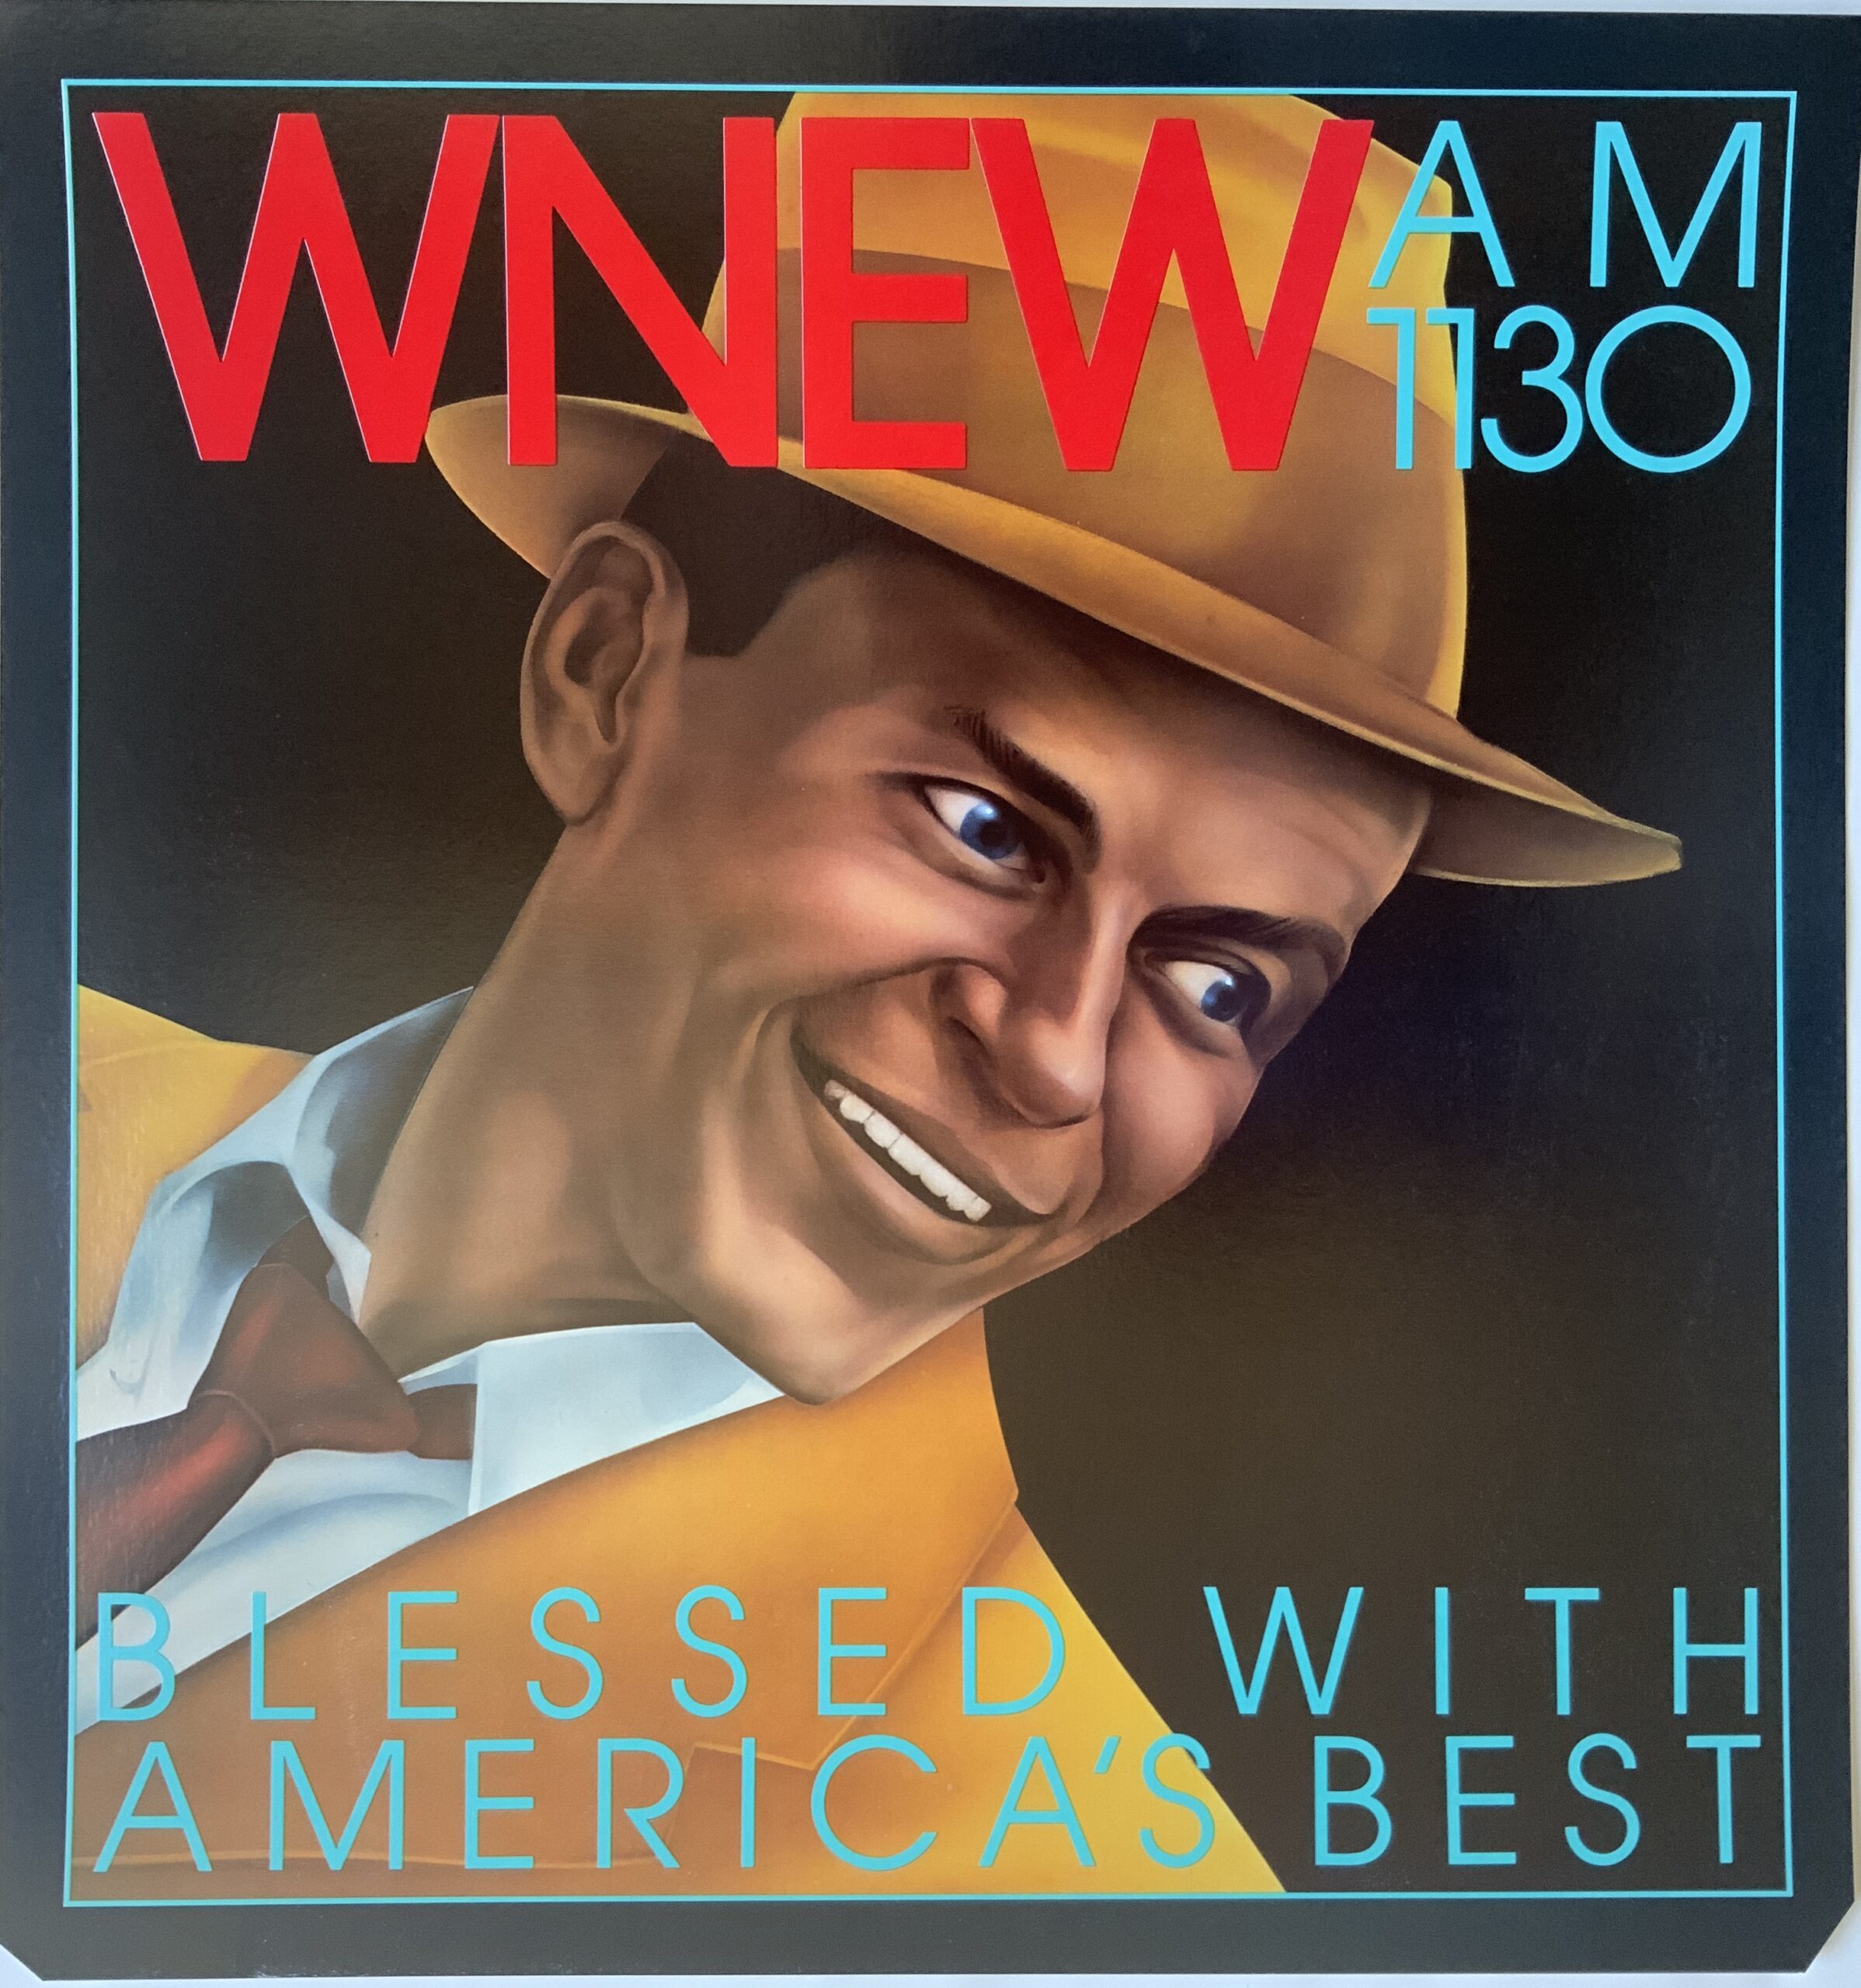 M633	WNEW AM 1130: BLESSED WITH AMERICA’S BEST - FRANK SINATRA SUBWAY POSTER CA. 1985